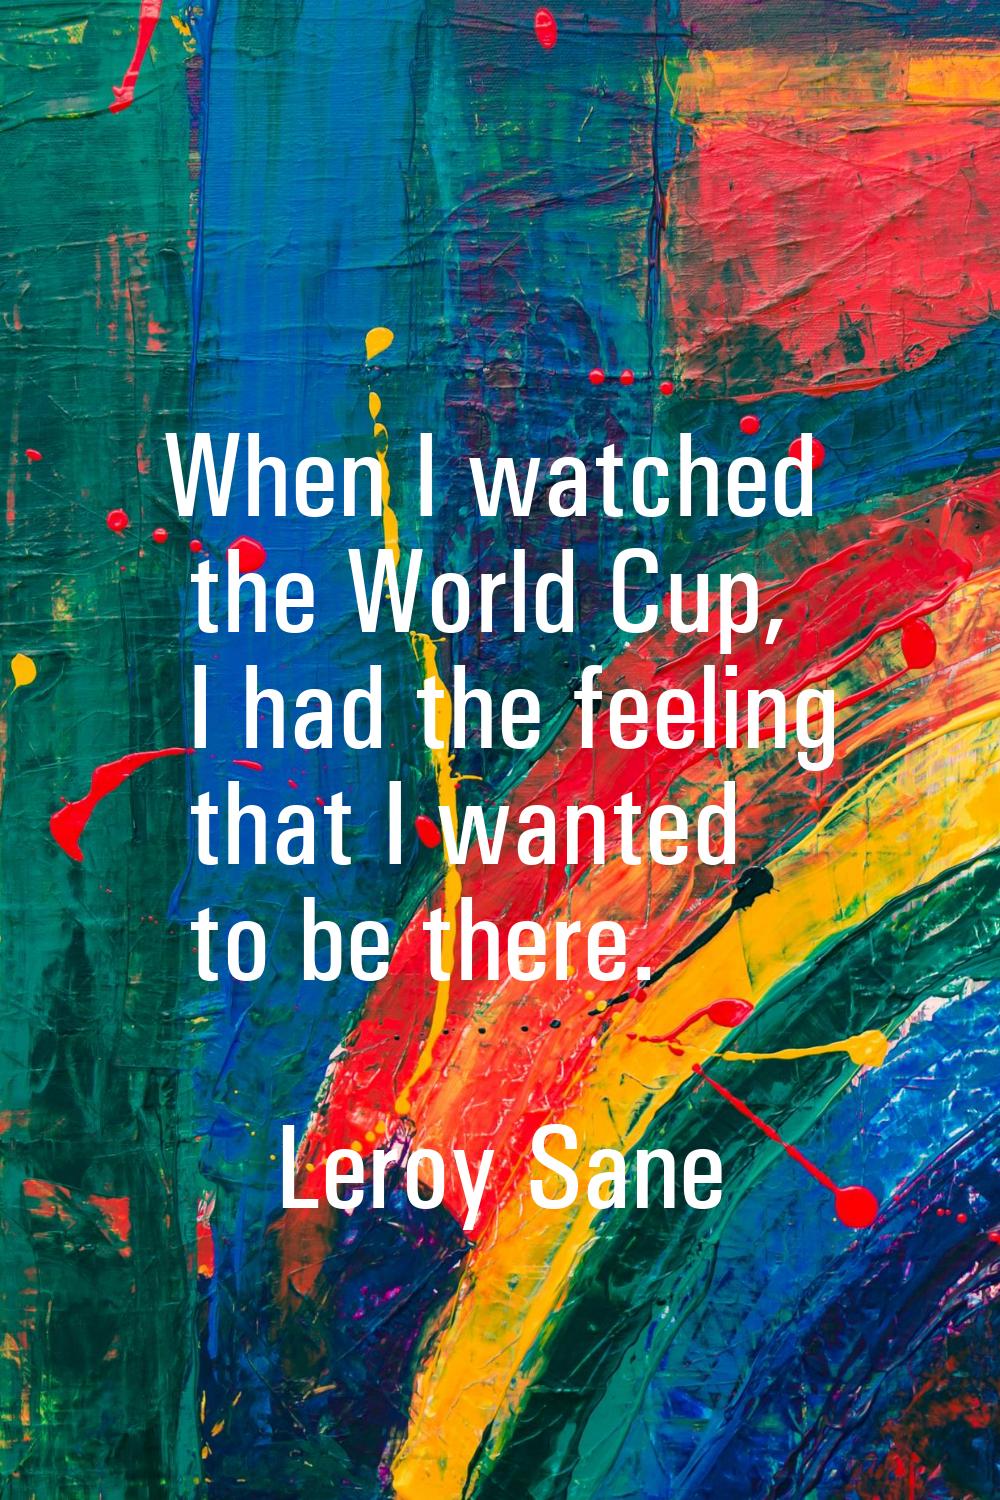 When I watched the World Cup, I had the feeling that I wanted to be there.